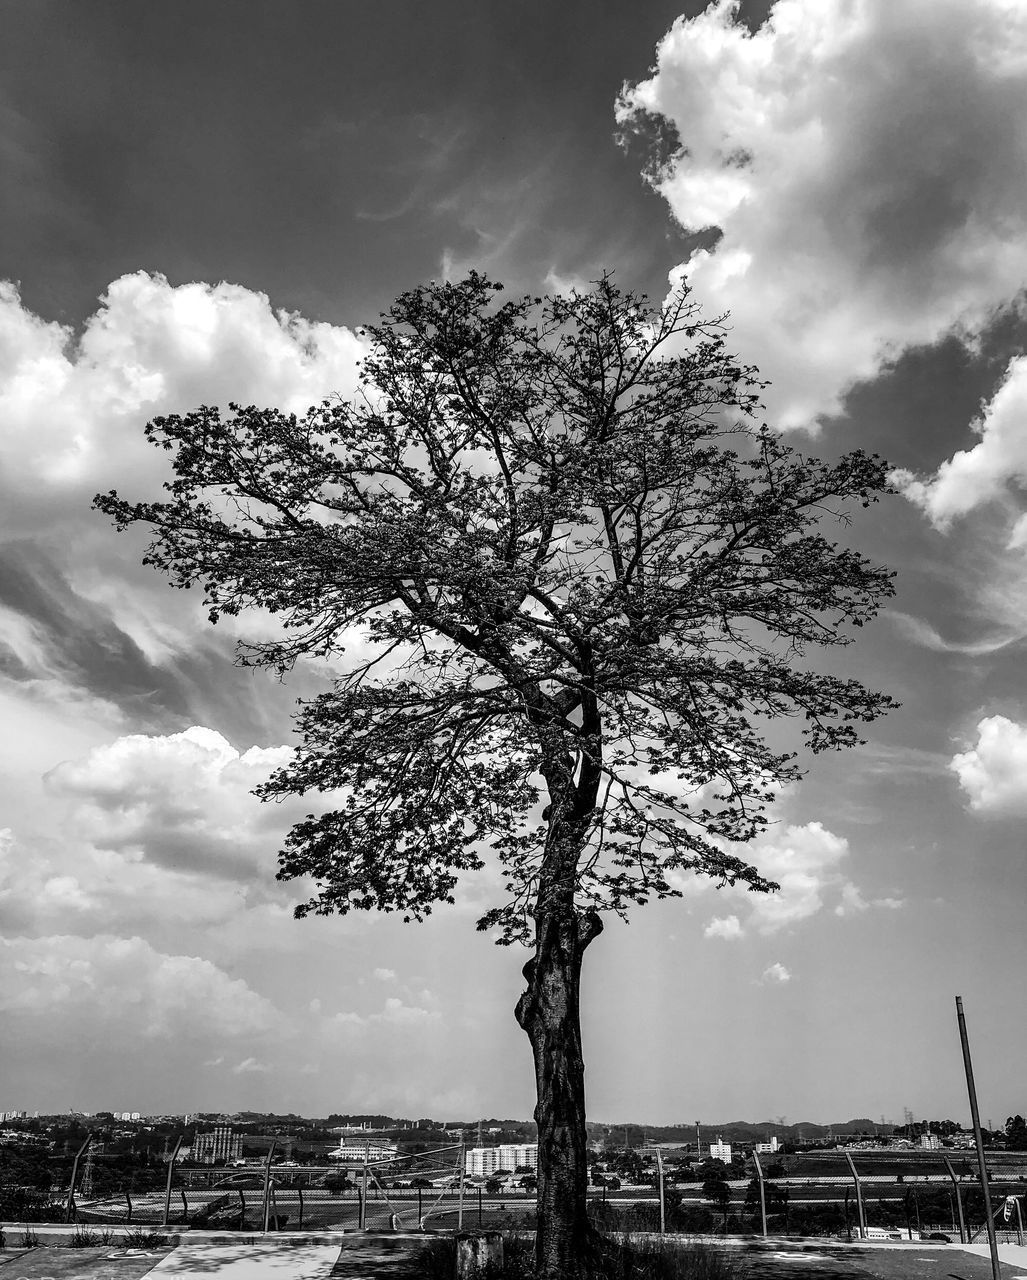 LOW ANGLE VIEW OF TREE AGAINST CLOUDY SKY